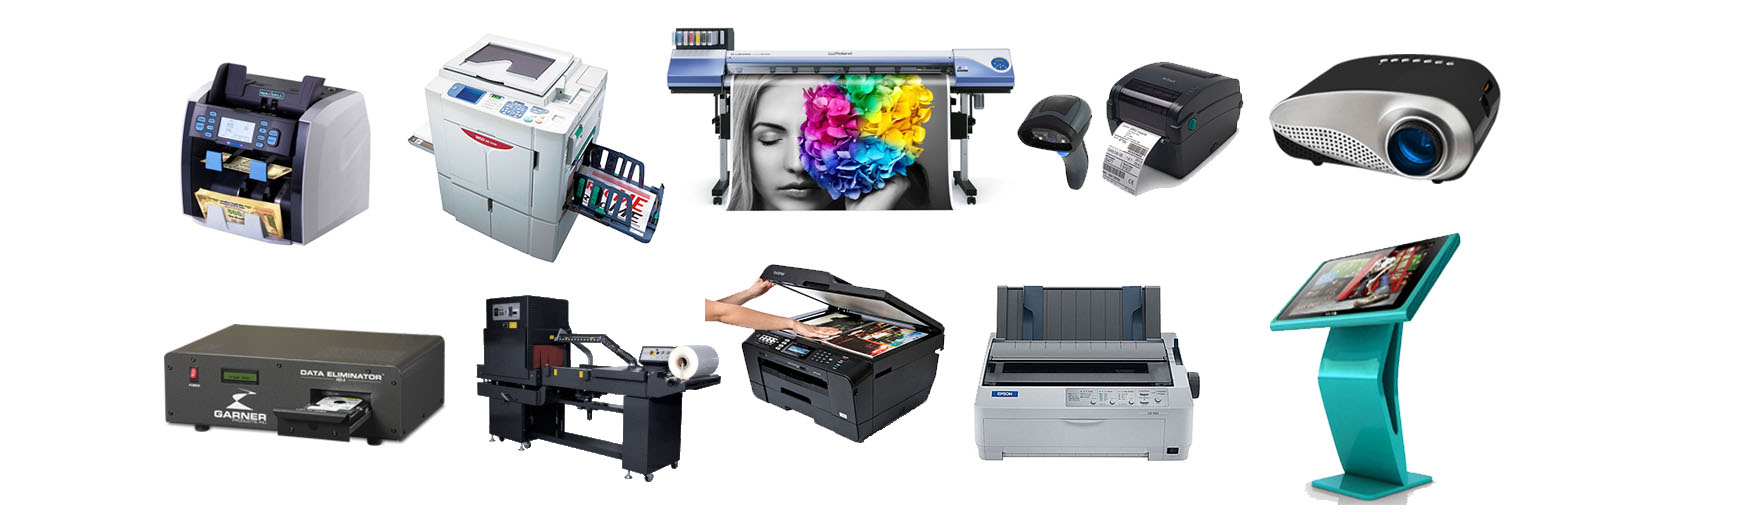 Retailer - Office Stationery, Office Automation, Banking Automation  Products